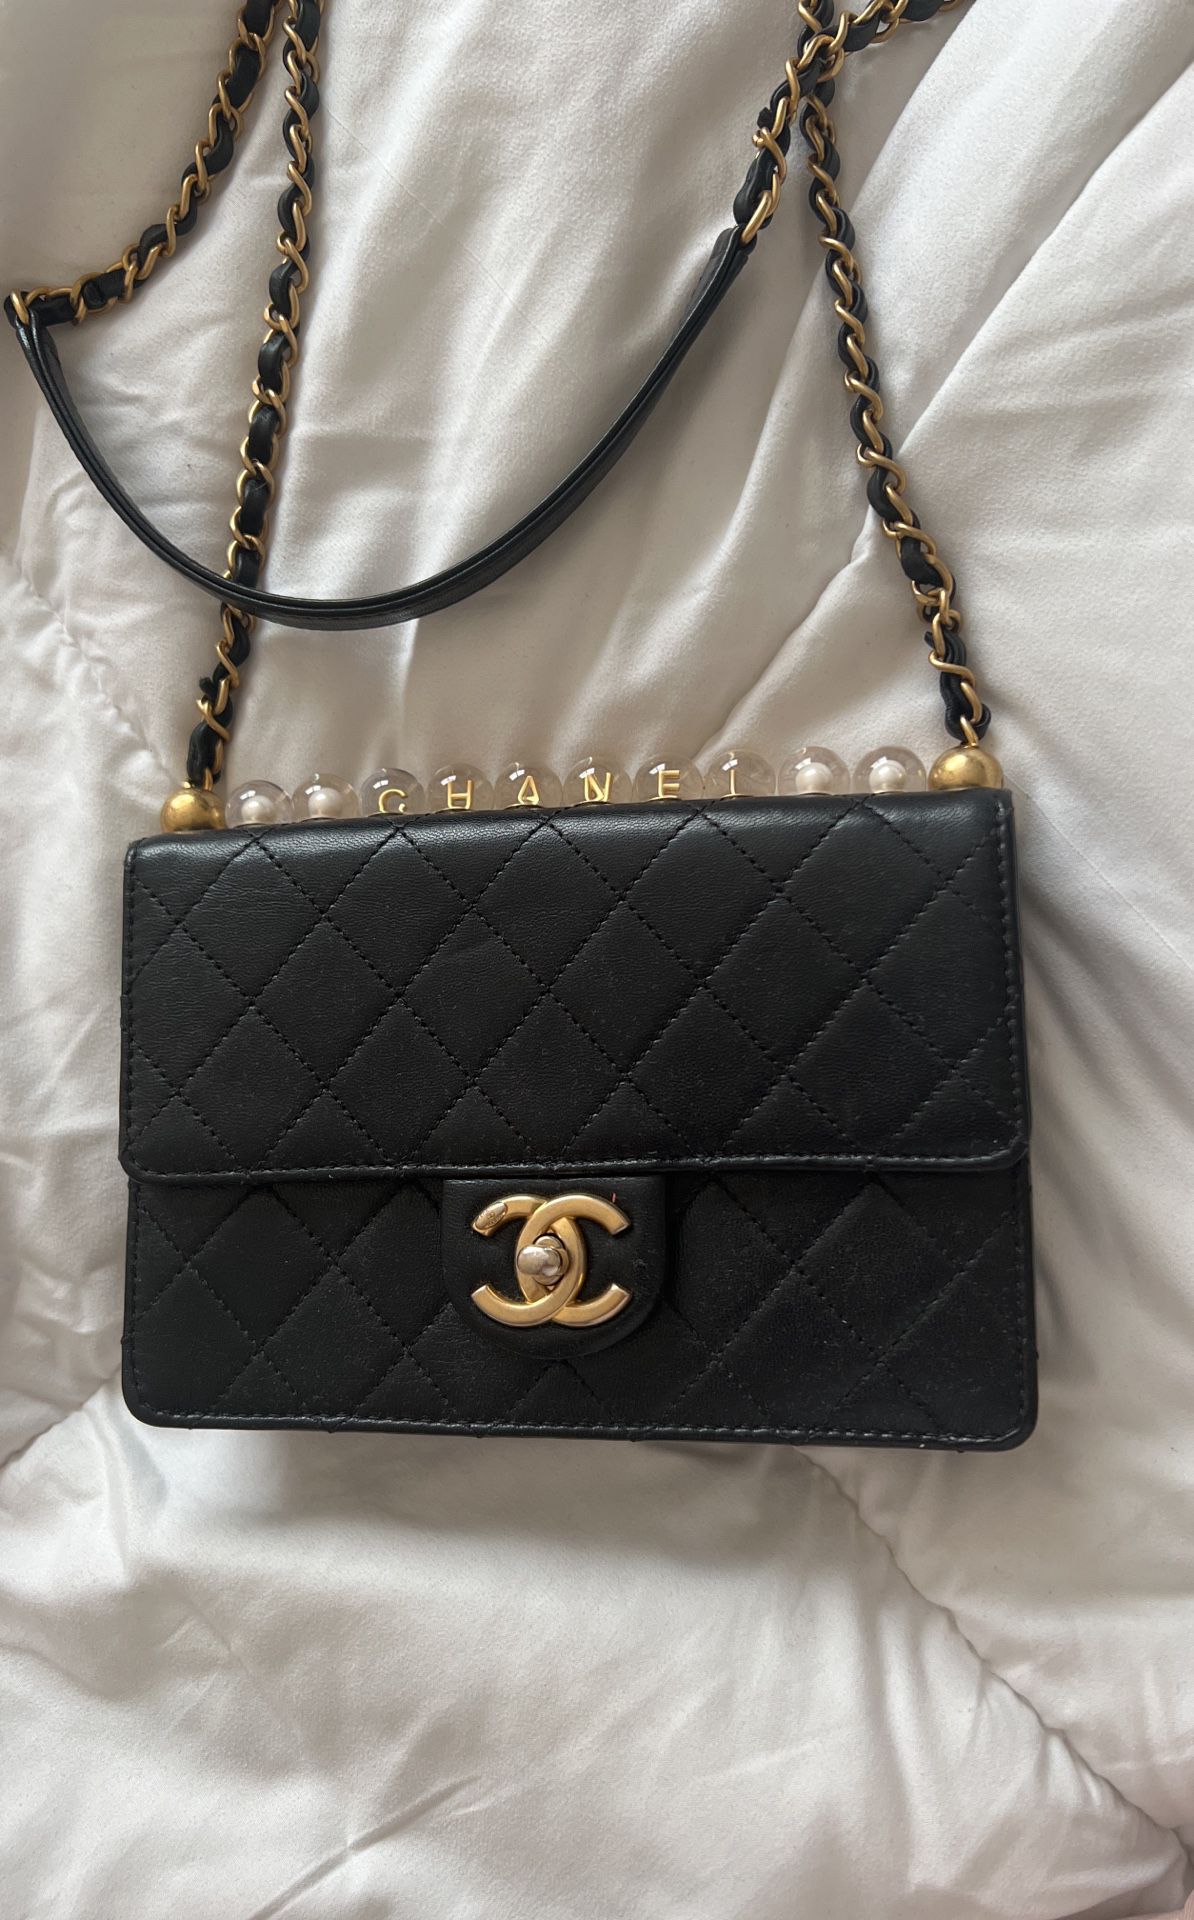 Chanel Bag Only Worn Twice